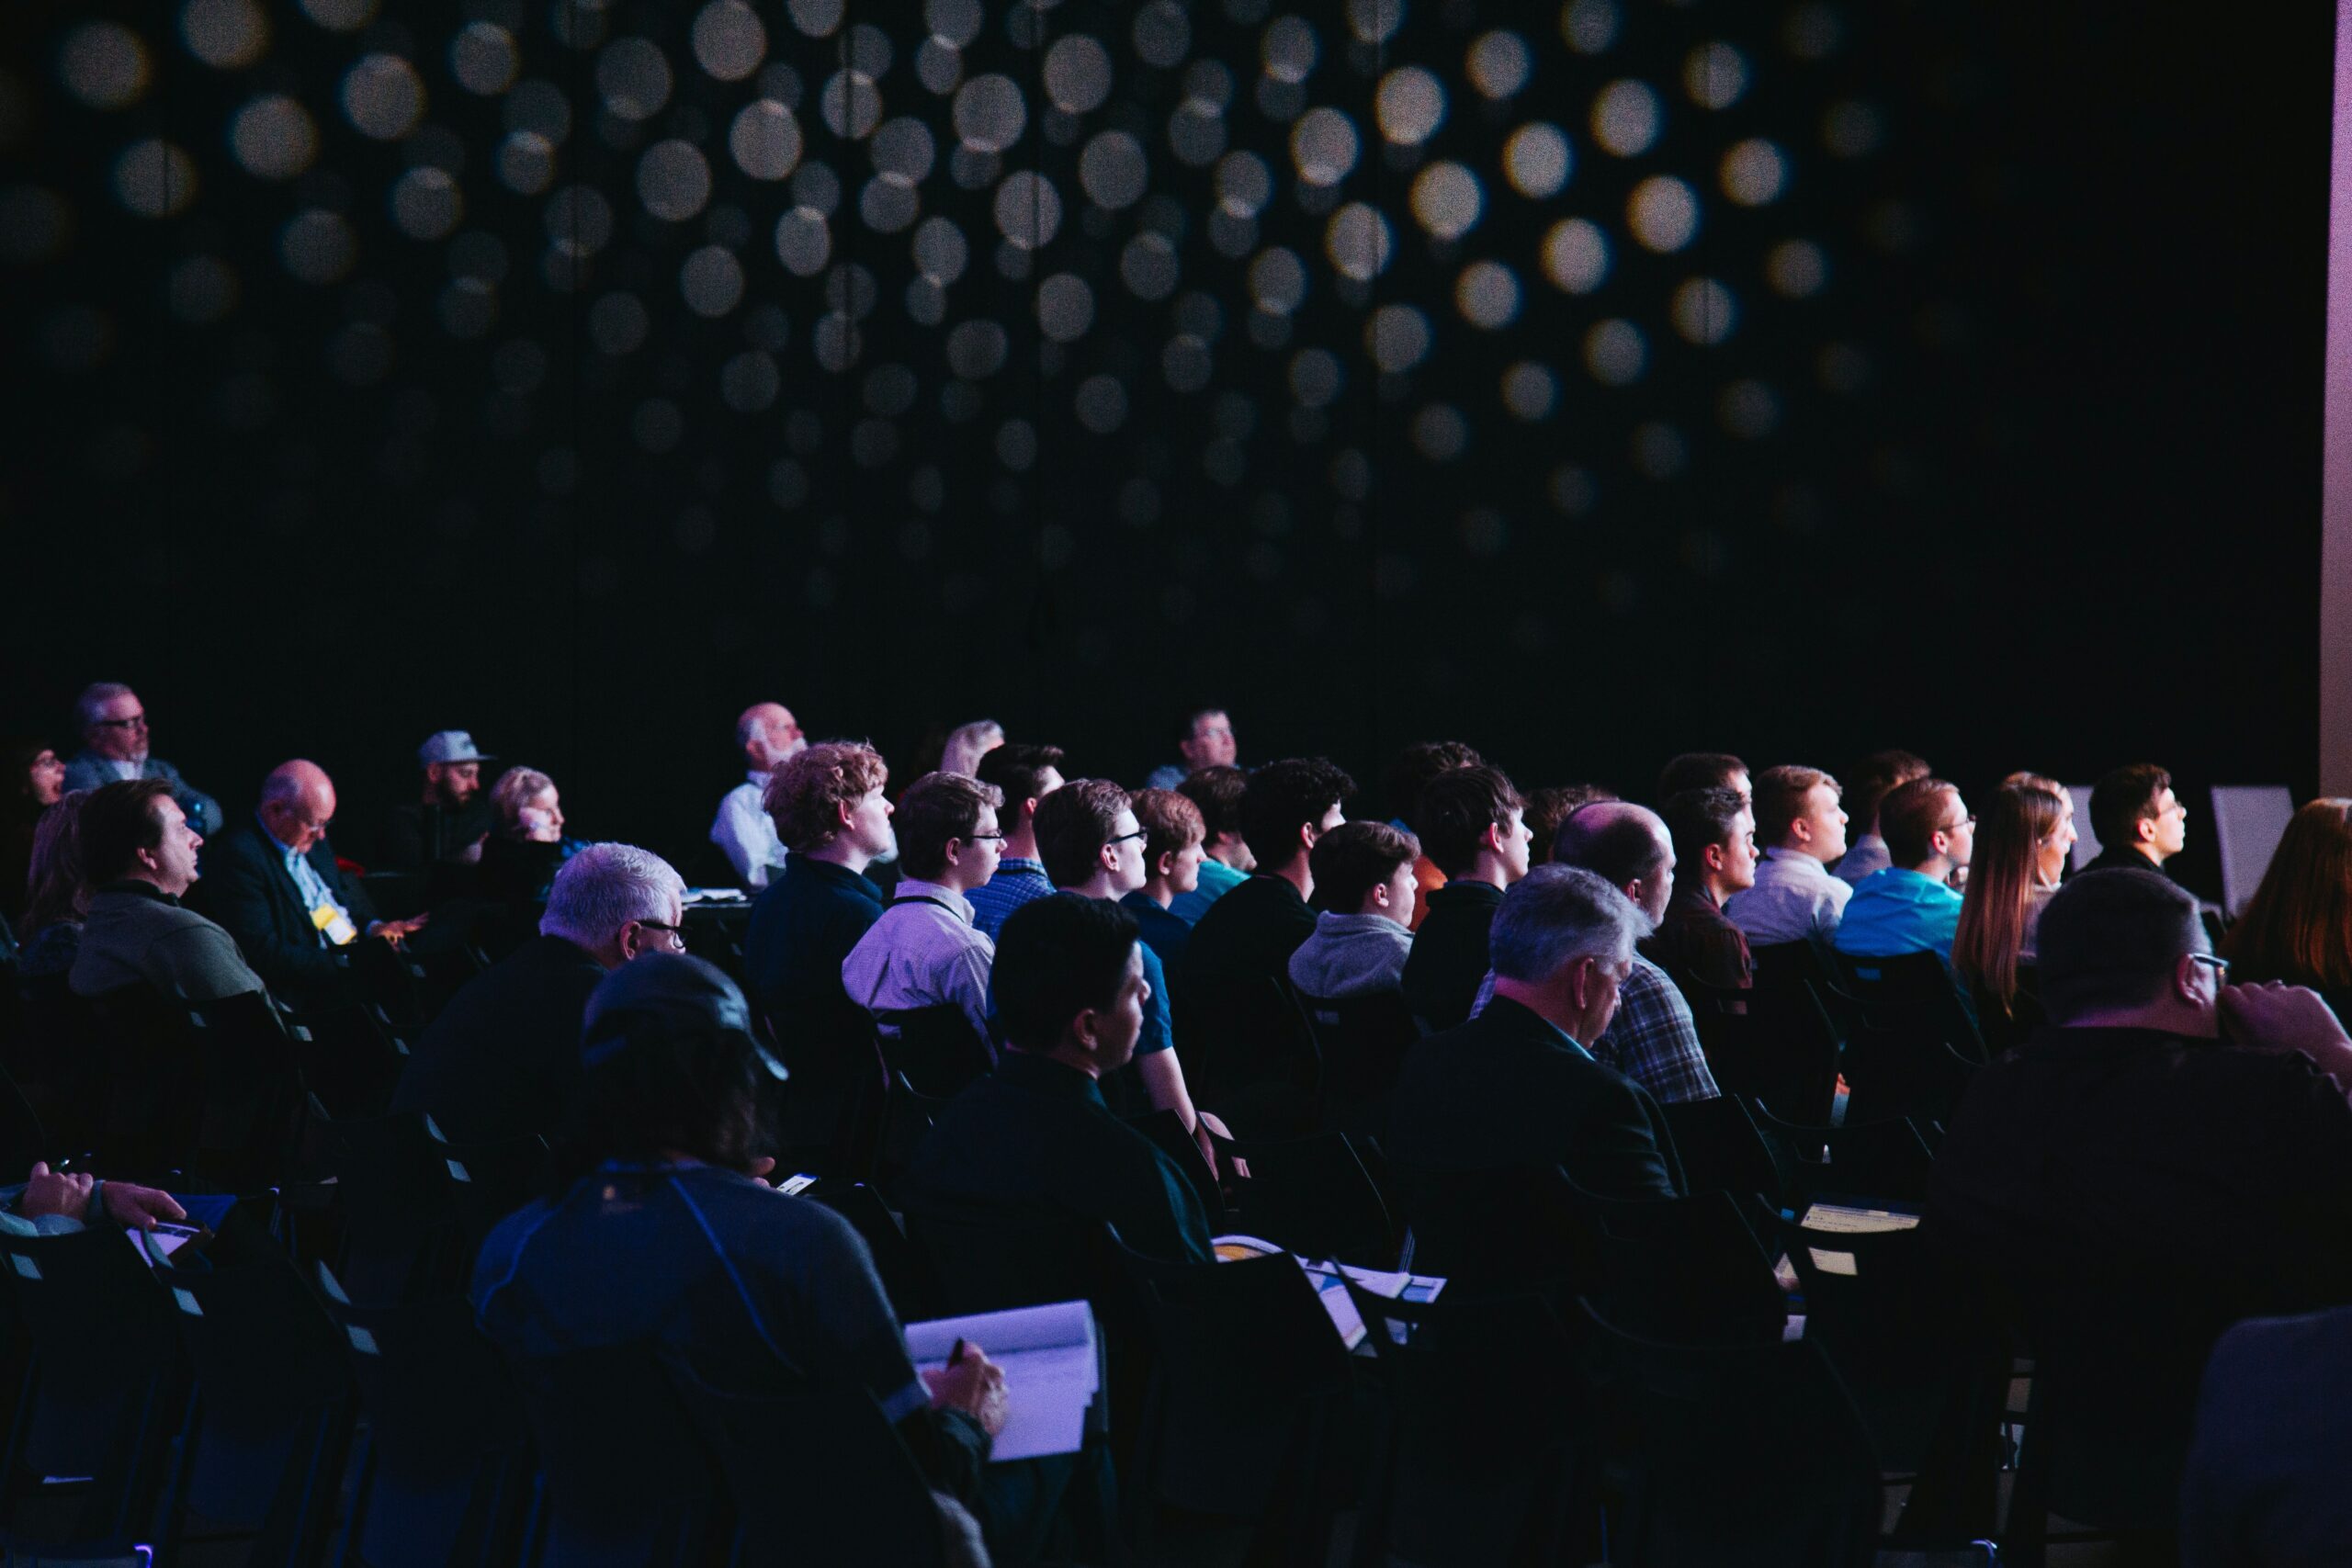 Conversations about the effects of light on humans and spaces, about the introduction of technology in lighting fixtures, or about the many innovations that we can expect for the future are some of the themes designers can expect to indulge in at these conferences and events.